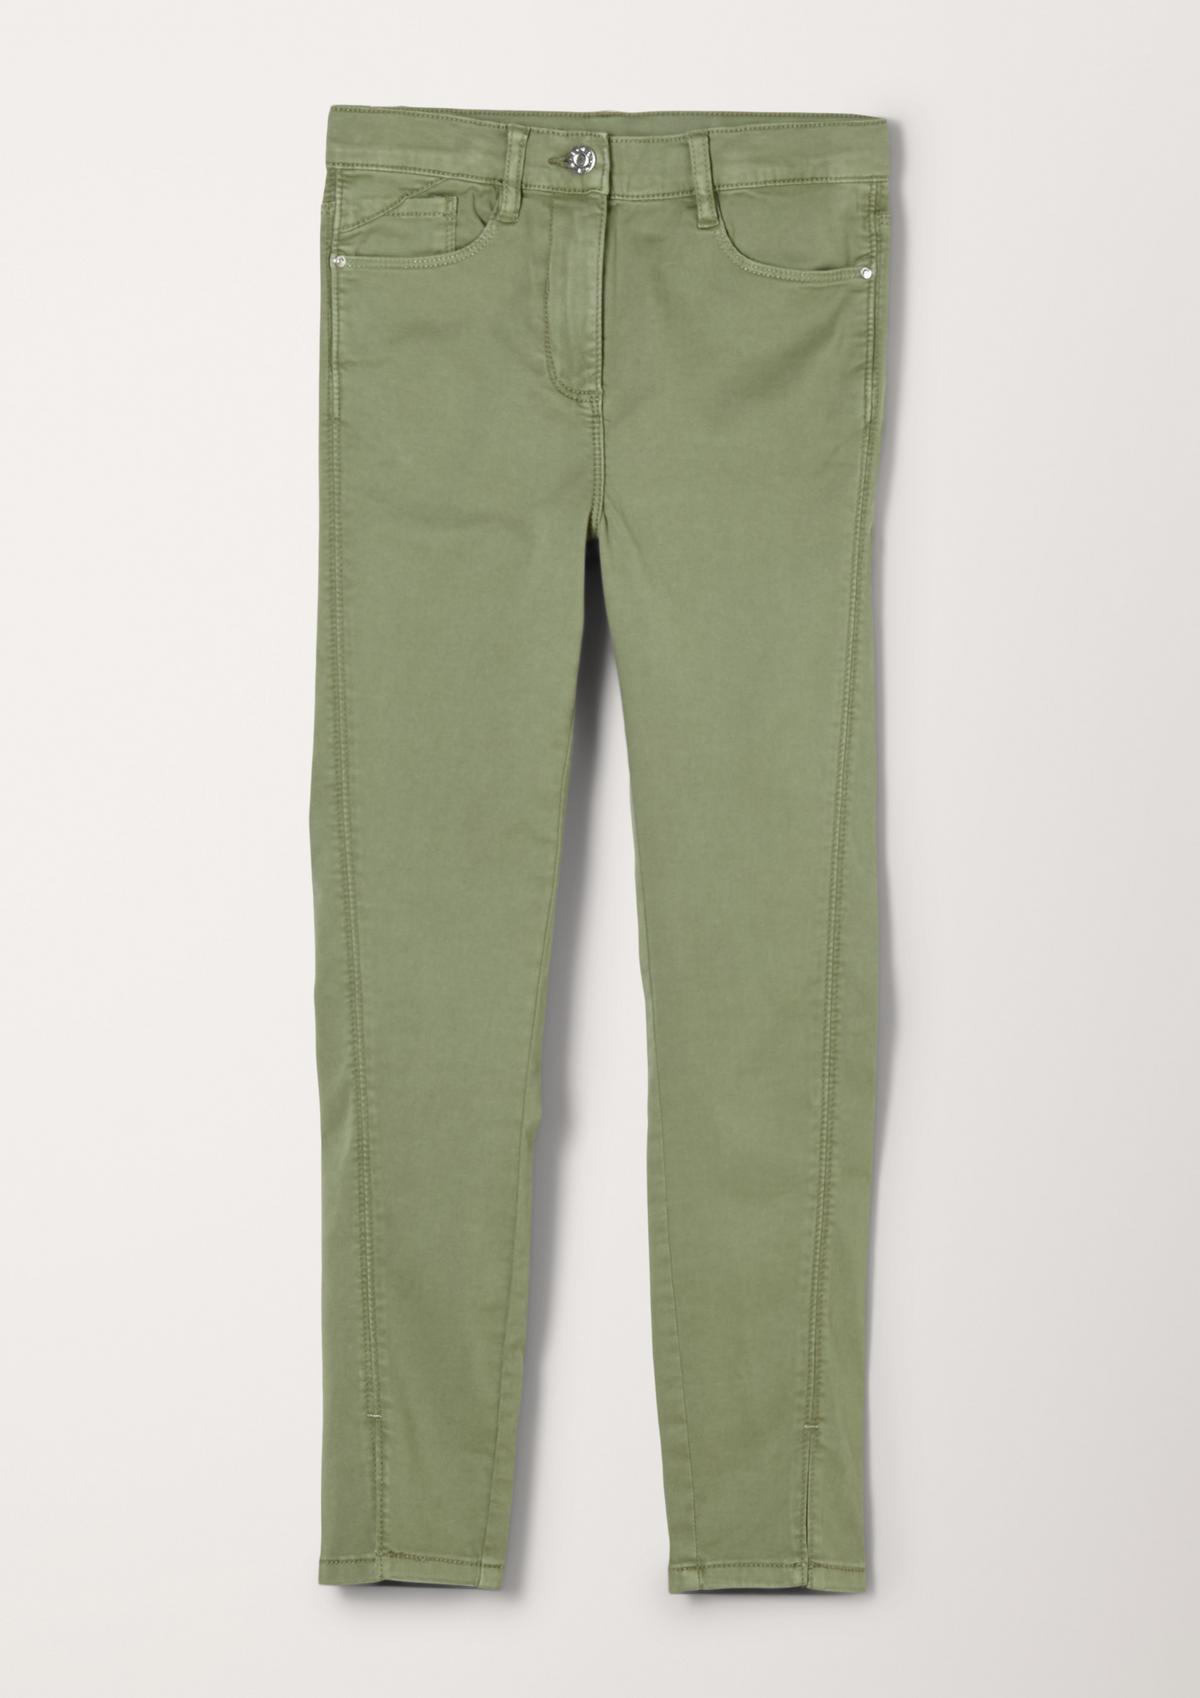 s.Oliver Trousers with a short slit on the leg